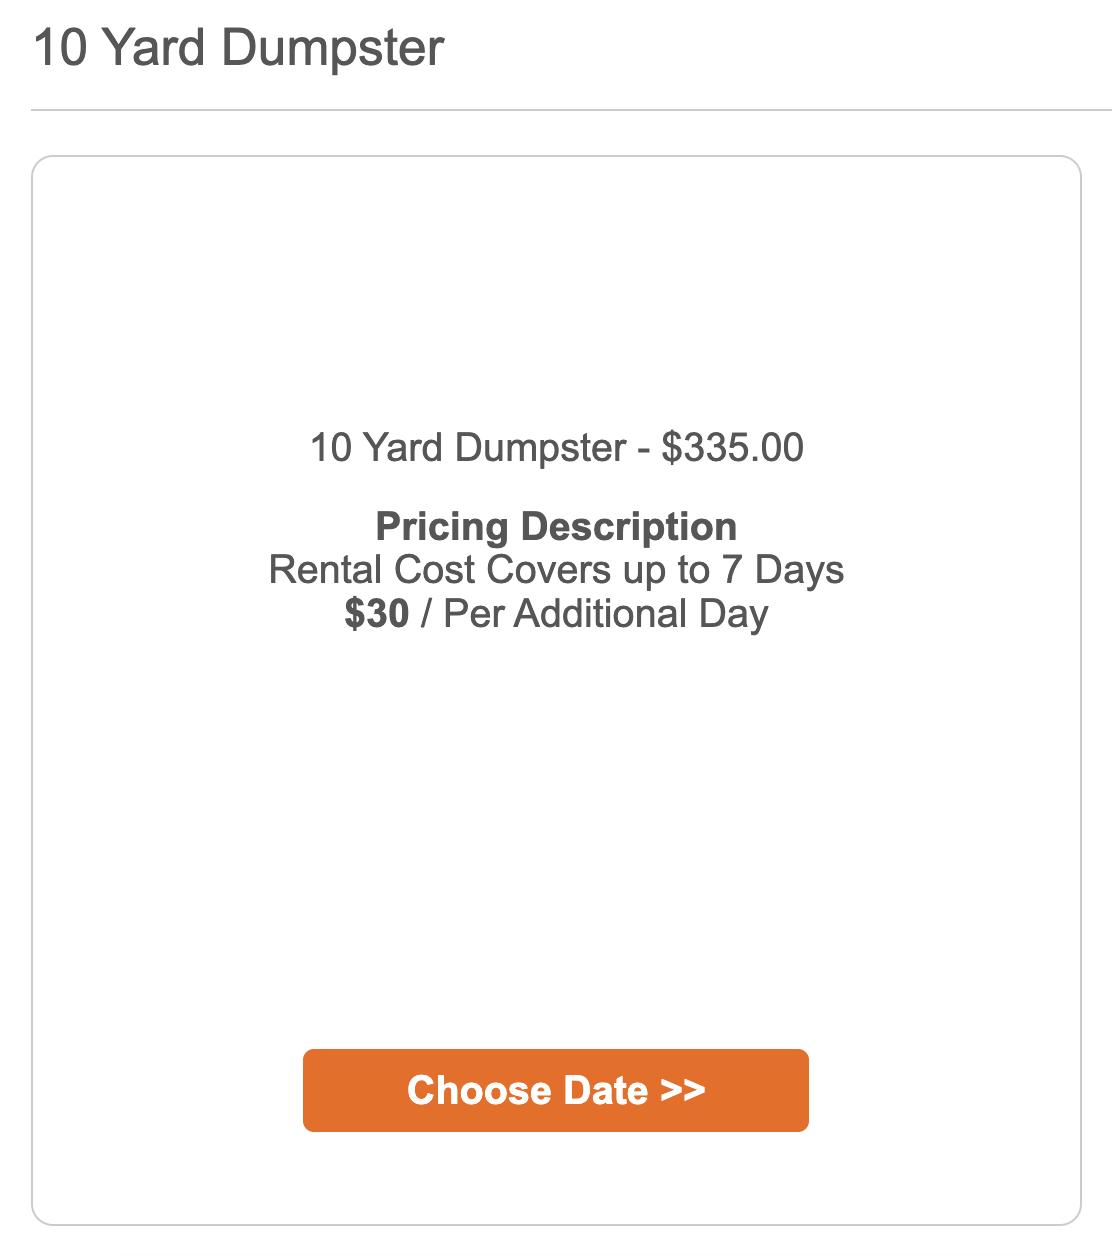 dumpster_daily_cost_price_rule_description_2.png